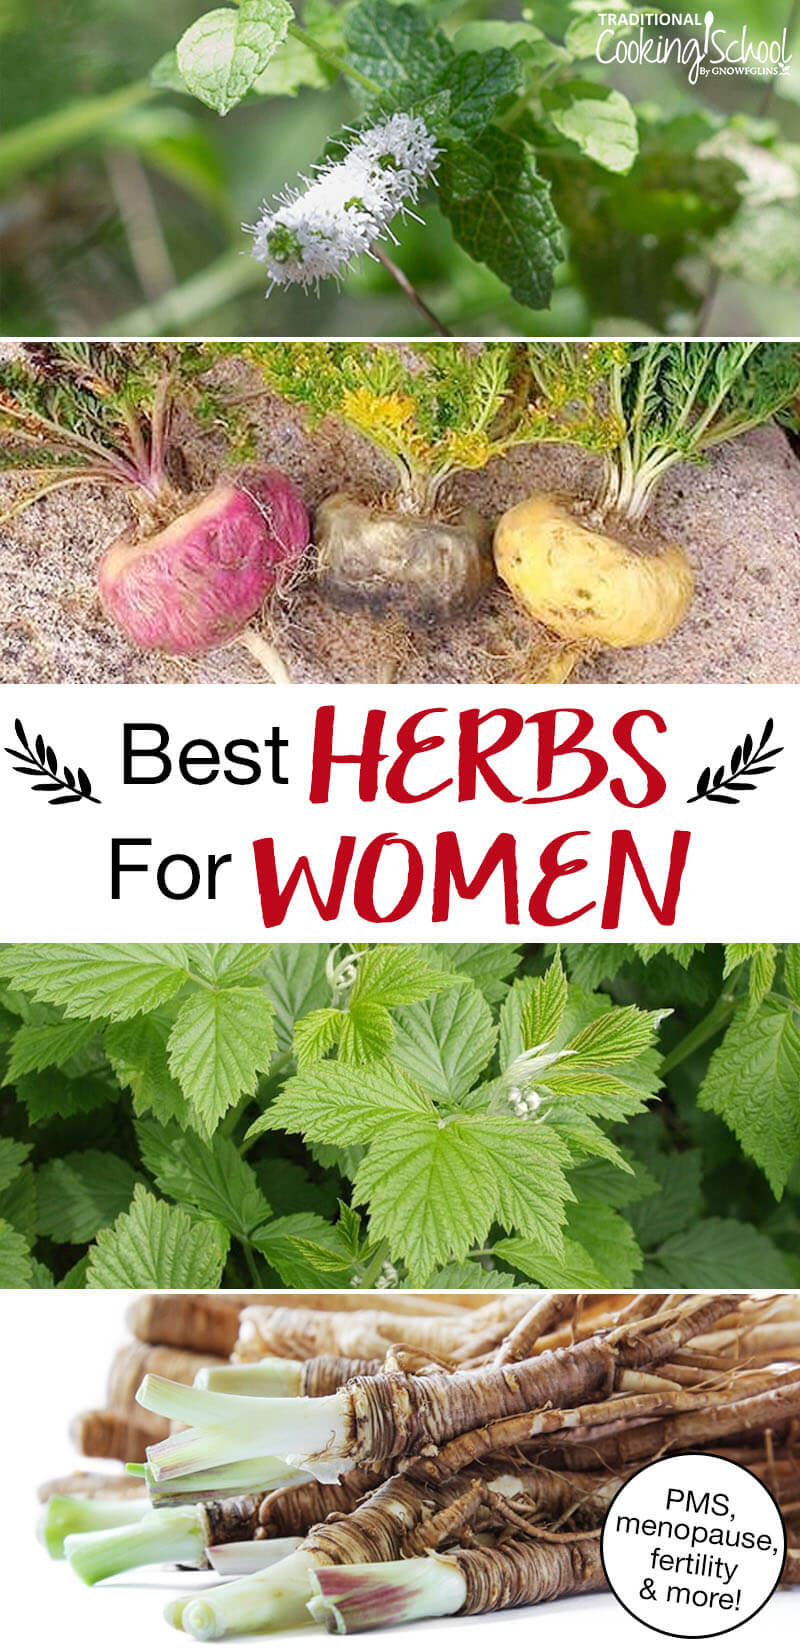 Photo collage of herbs, including maca root, red raspberry leaf, dong quai, and black cohosh. Text overlay says: "Best Herbs For Women (PMS, menopause, fertility & more!)"